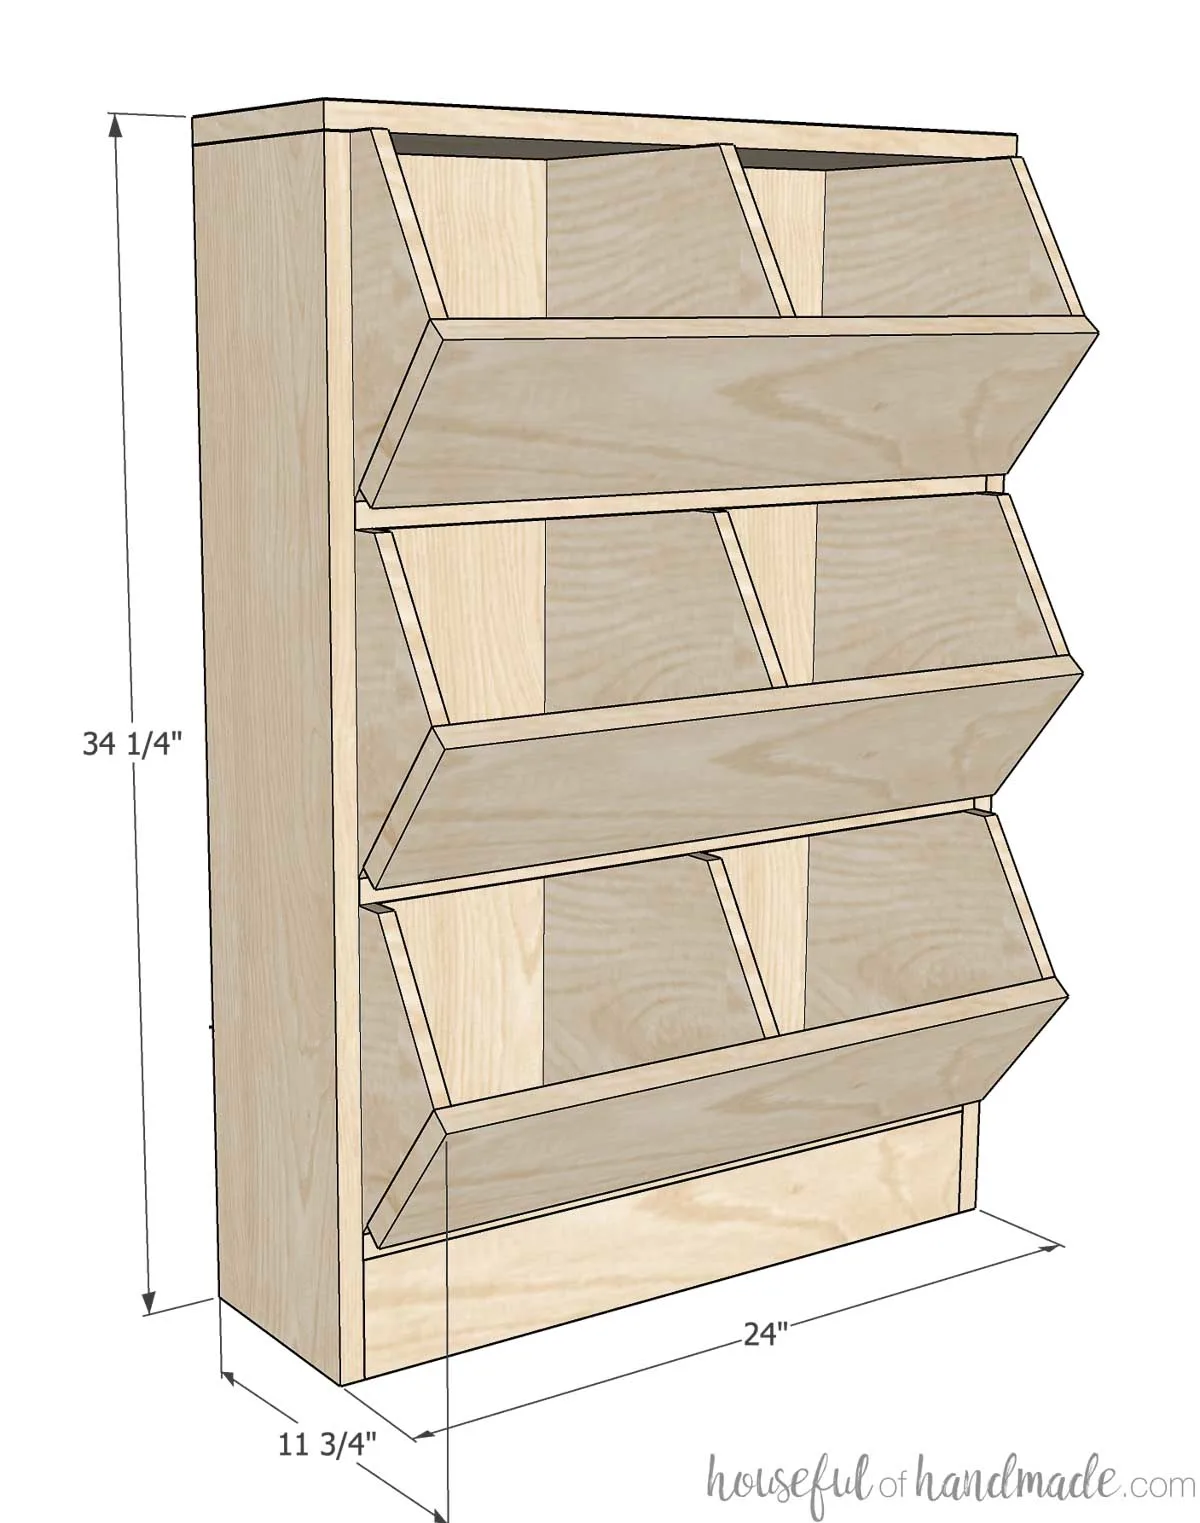 3D Sketch of the vegetable storage bins with overall dimensions noted. 